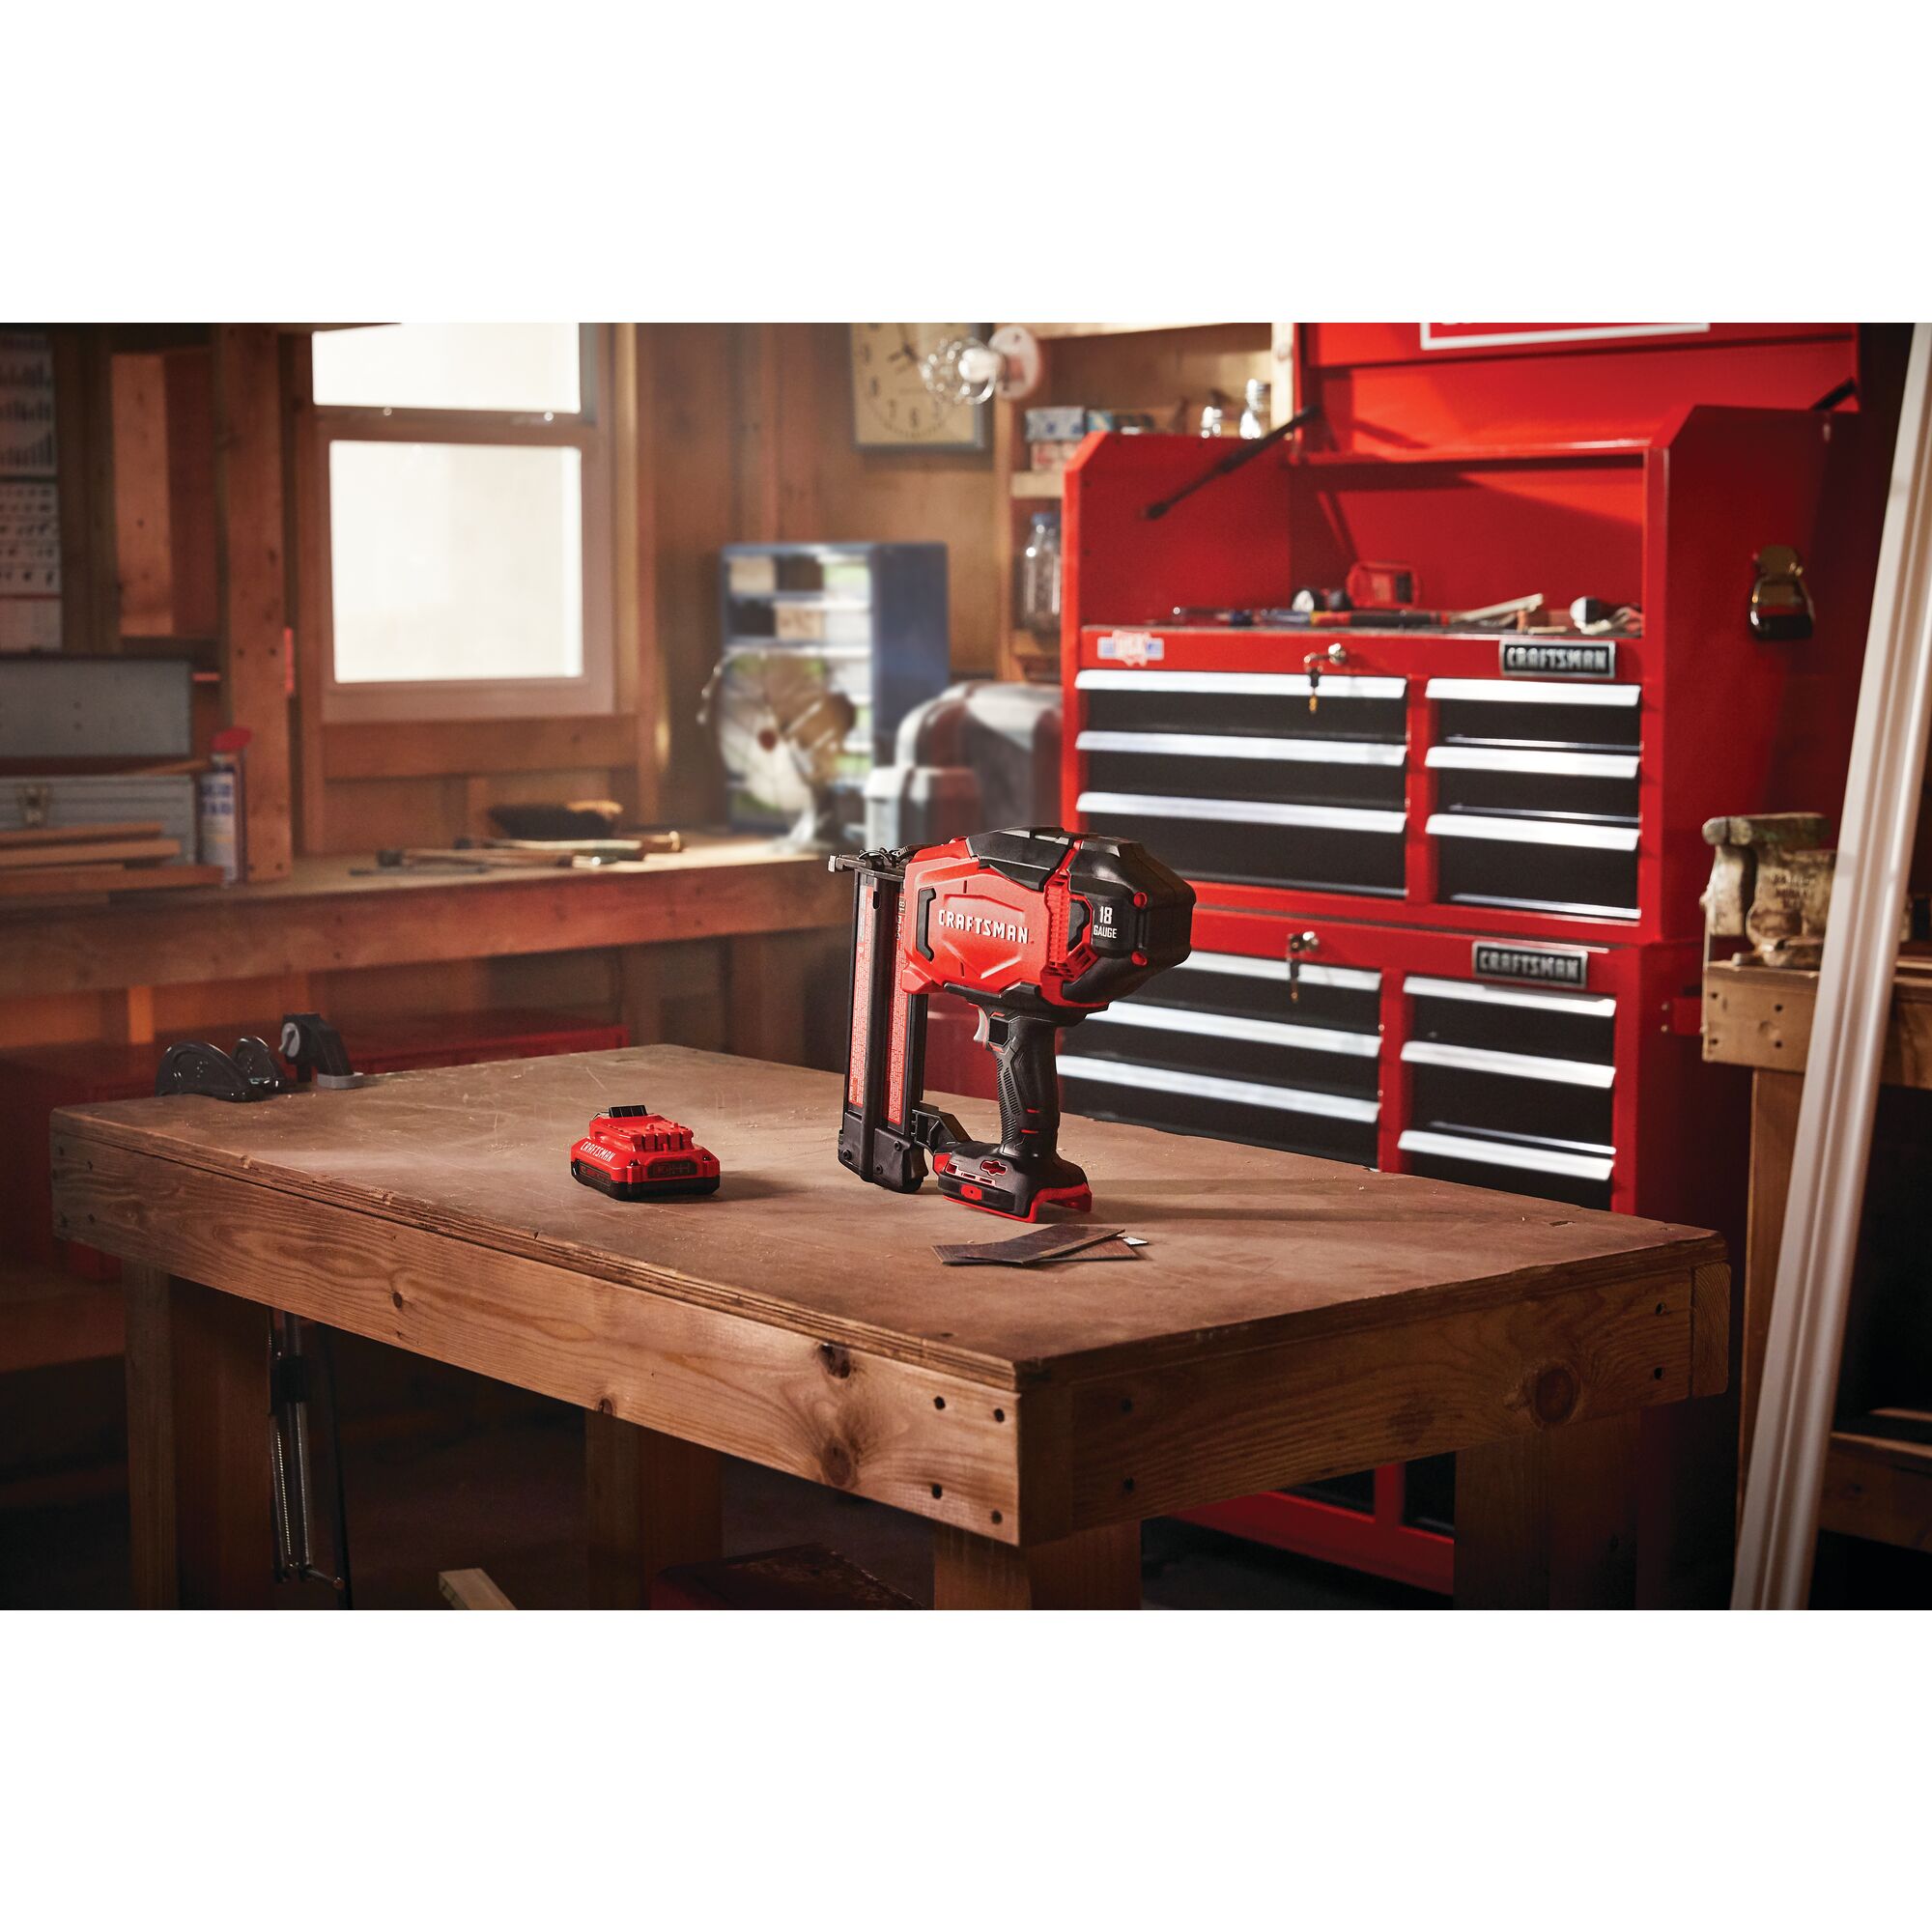 20 volt 18 gauge cordless brad nailer placed on a wooden table.